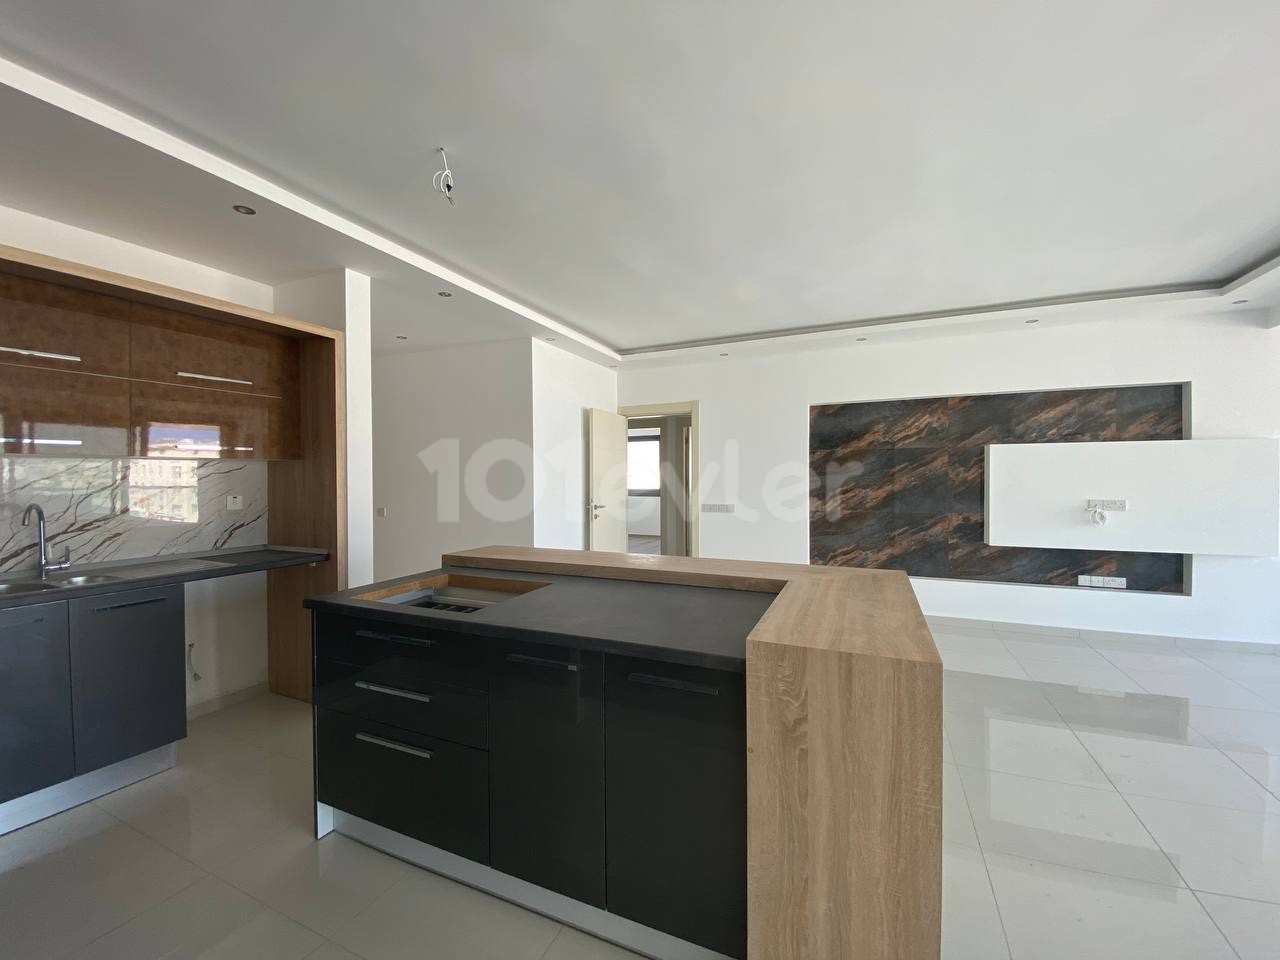 We have a 3 Bedroom Penthouse Apartment in the Center of Kyrenia ** 